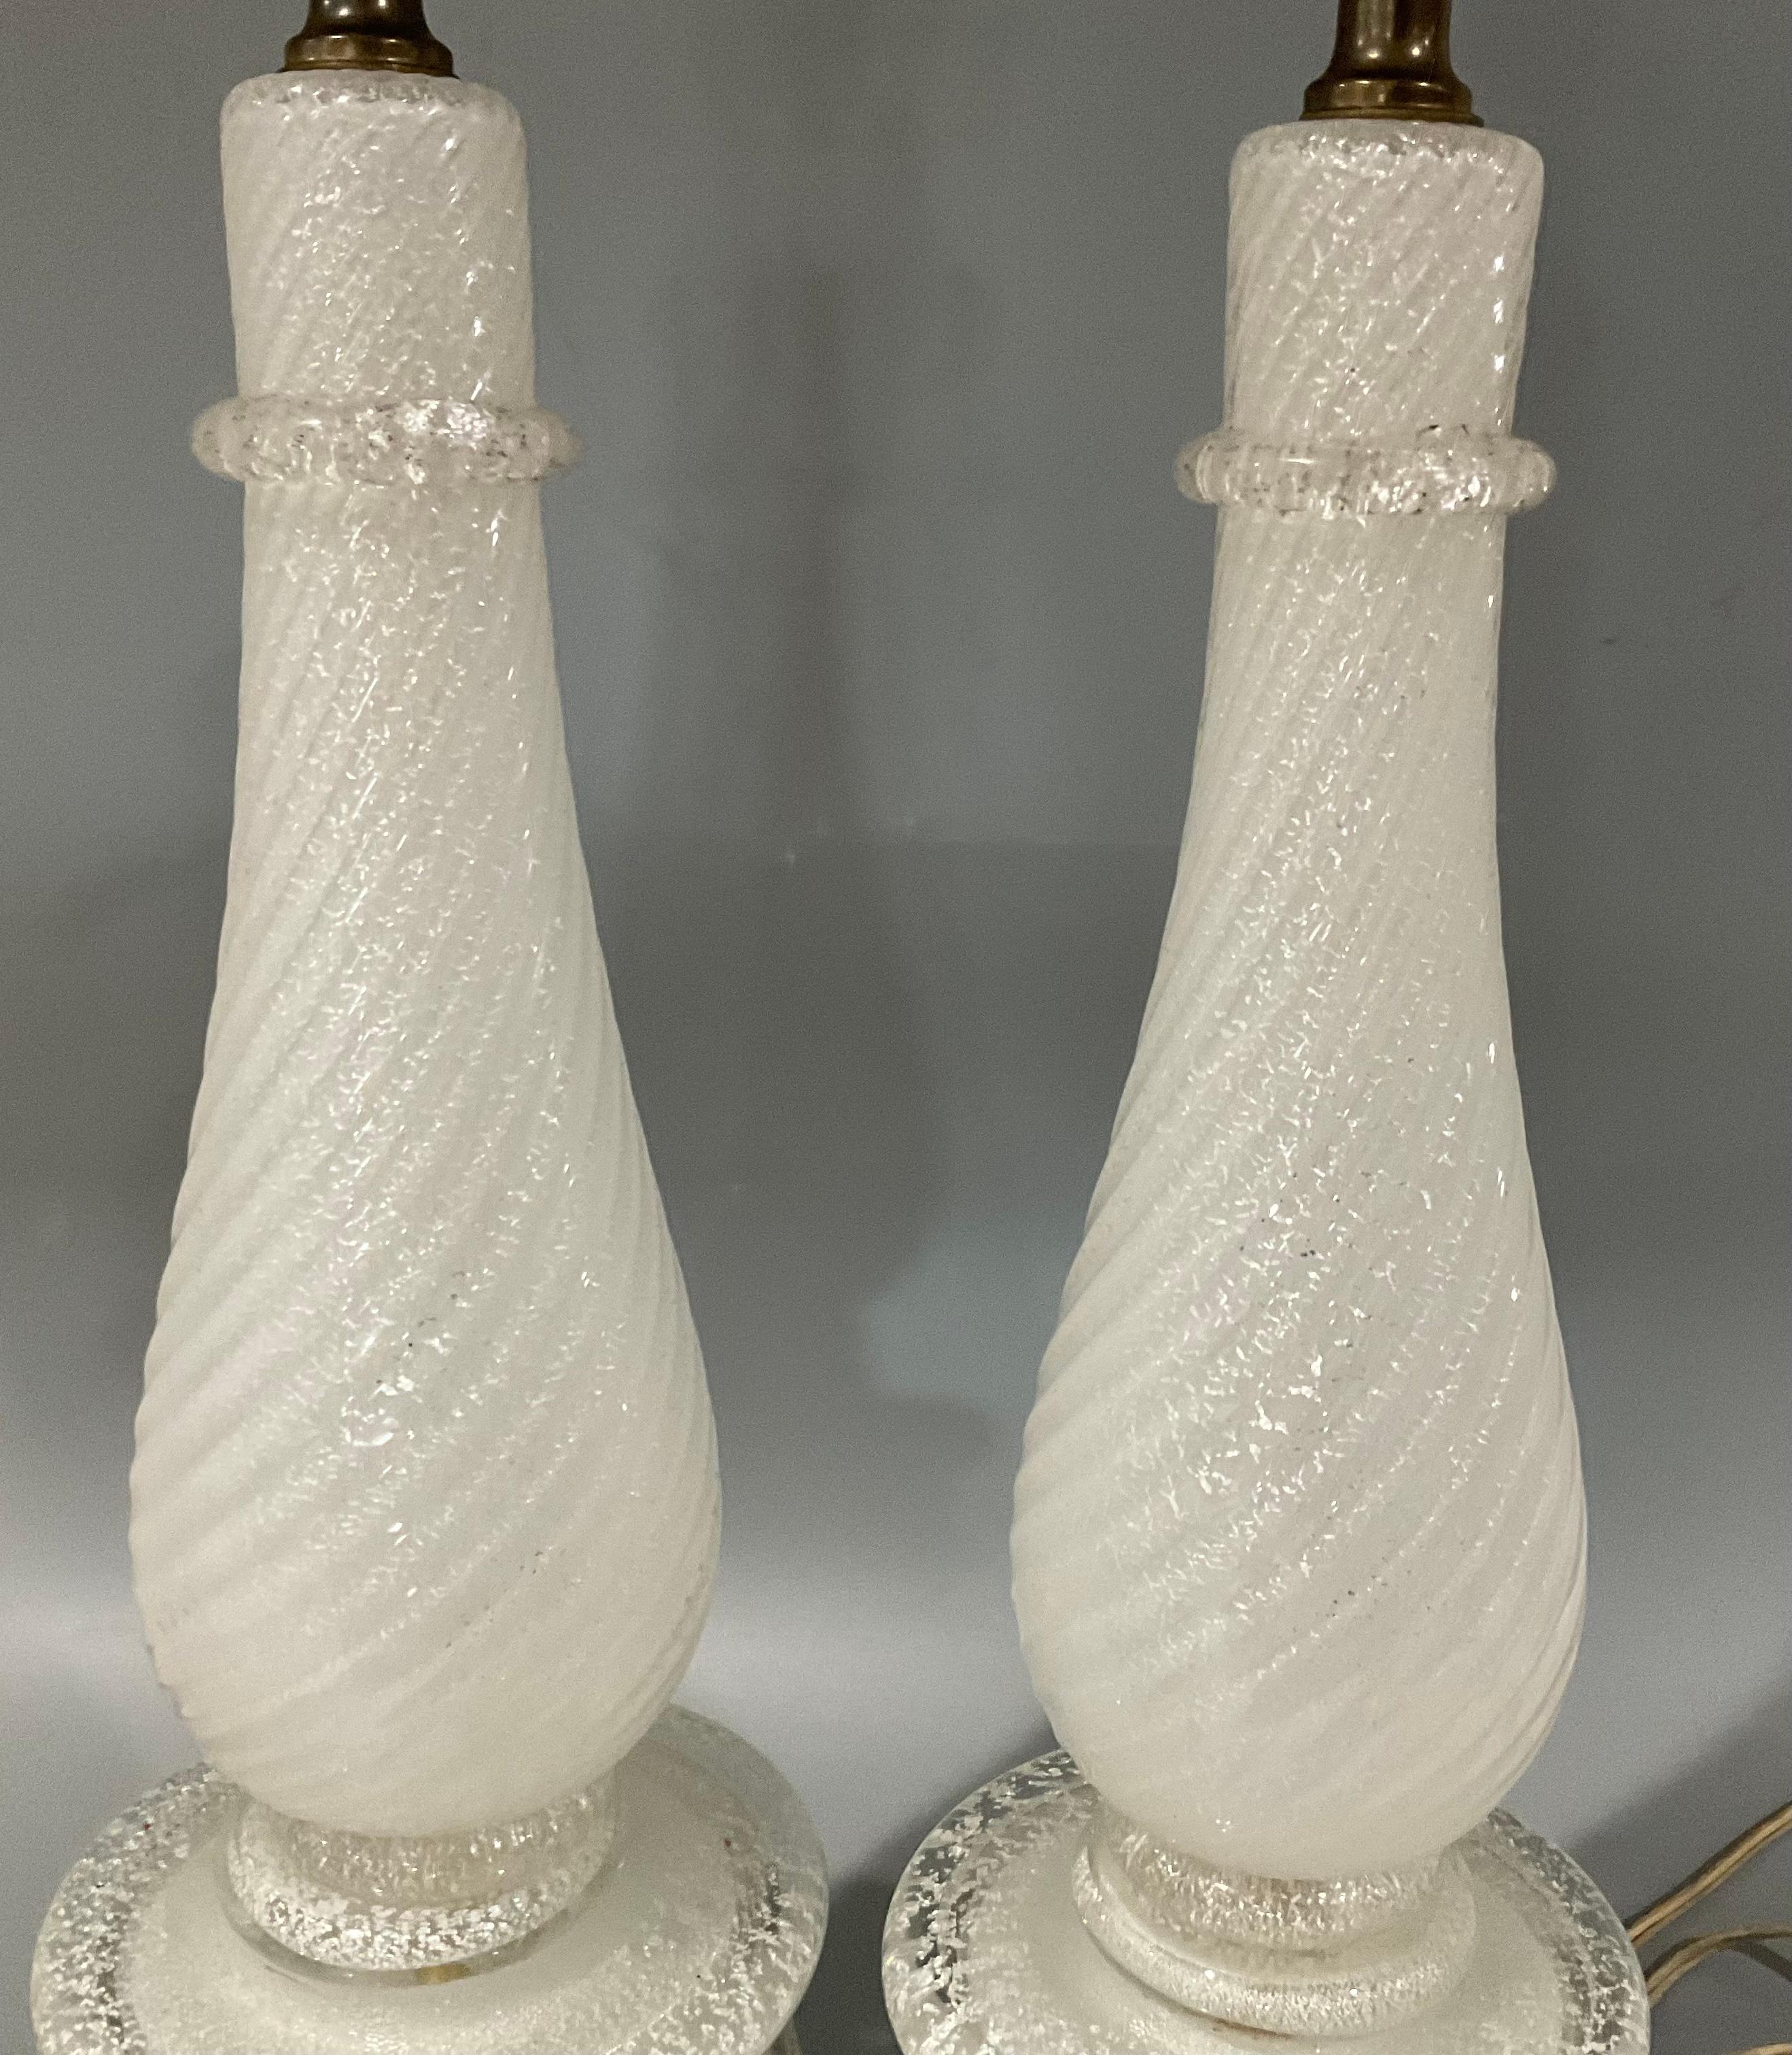 Pair Barovier and Toso Murano glass lamps by Ercole Barovier white with silver flecks. Applied clear band and applied circular rings. Glass height is 17.25. Measurements without harps as given is 21 1/4 inch height by 5 1/2 inches.